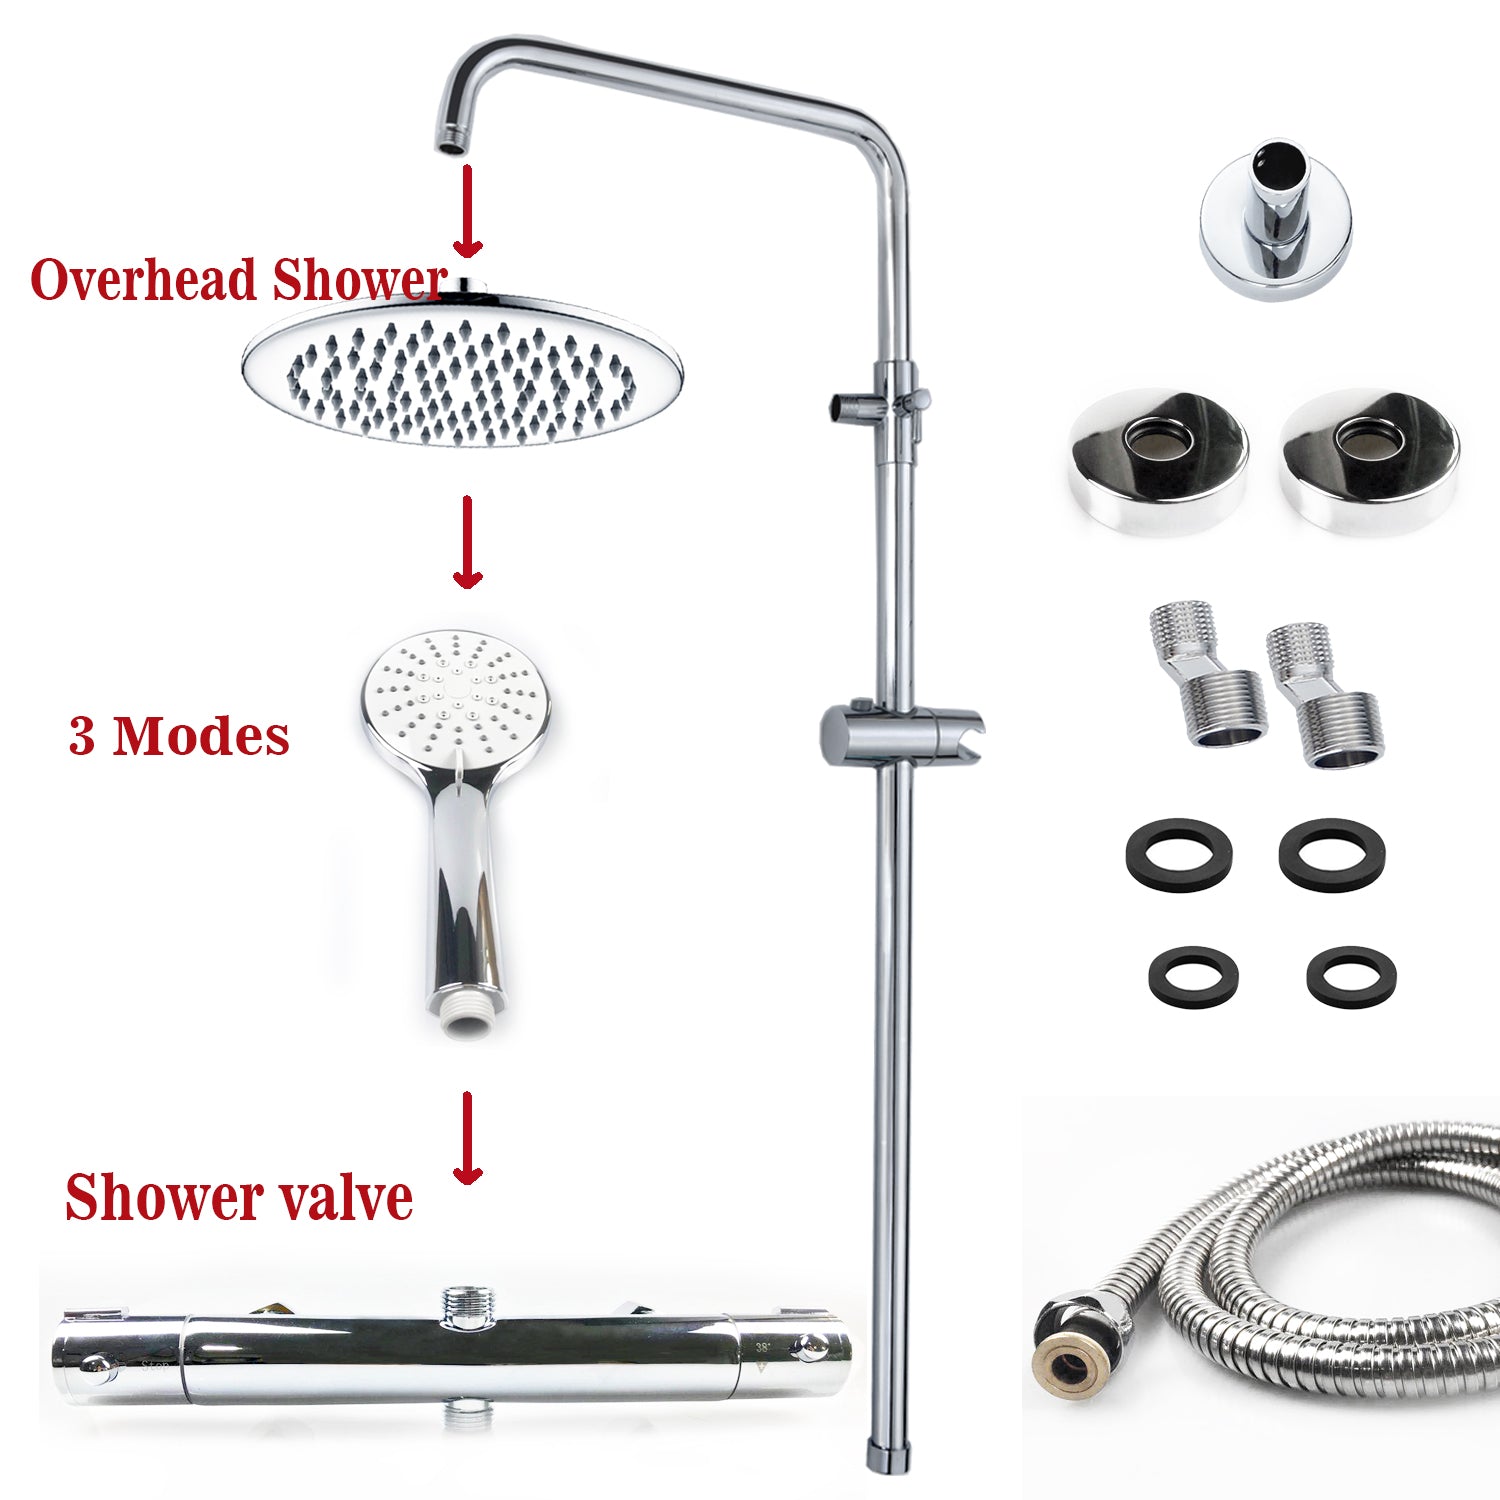 AICA Thermostatic Shower Mixer Square System&5 Function Handshower Kit